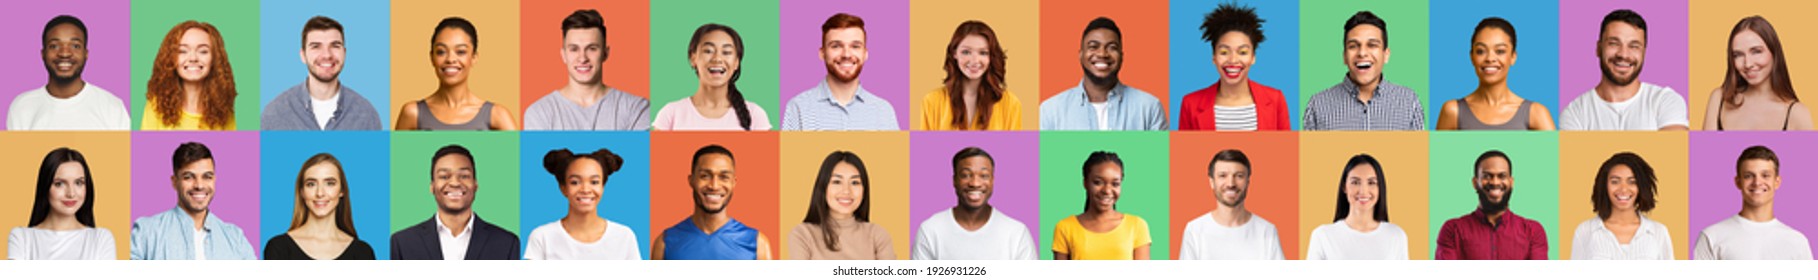 Colorful Mosaic Of Happy Faces And Portraits Of Young Millennial People Smiling Posing On Different Colored Backgrounds. Millennials Generation, Successful Multicutural People Group Portrait. Collage - Shutterstock ID 1926931226